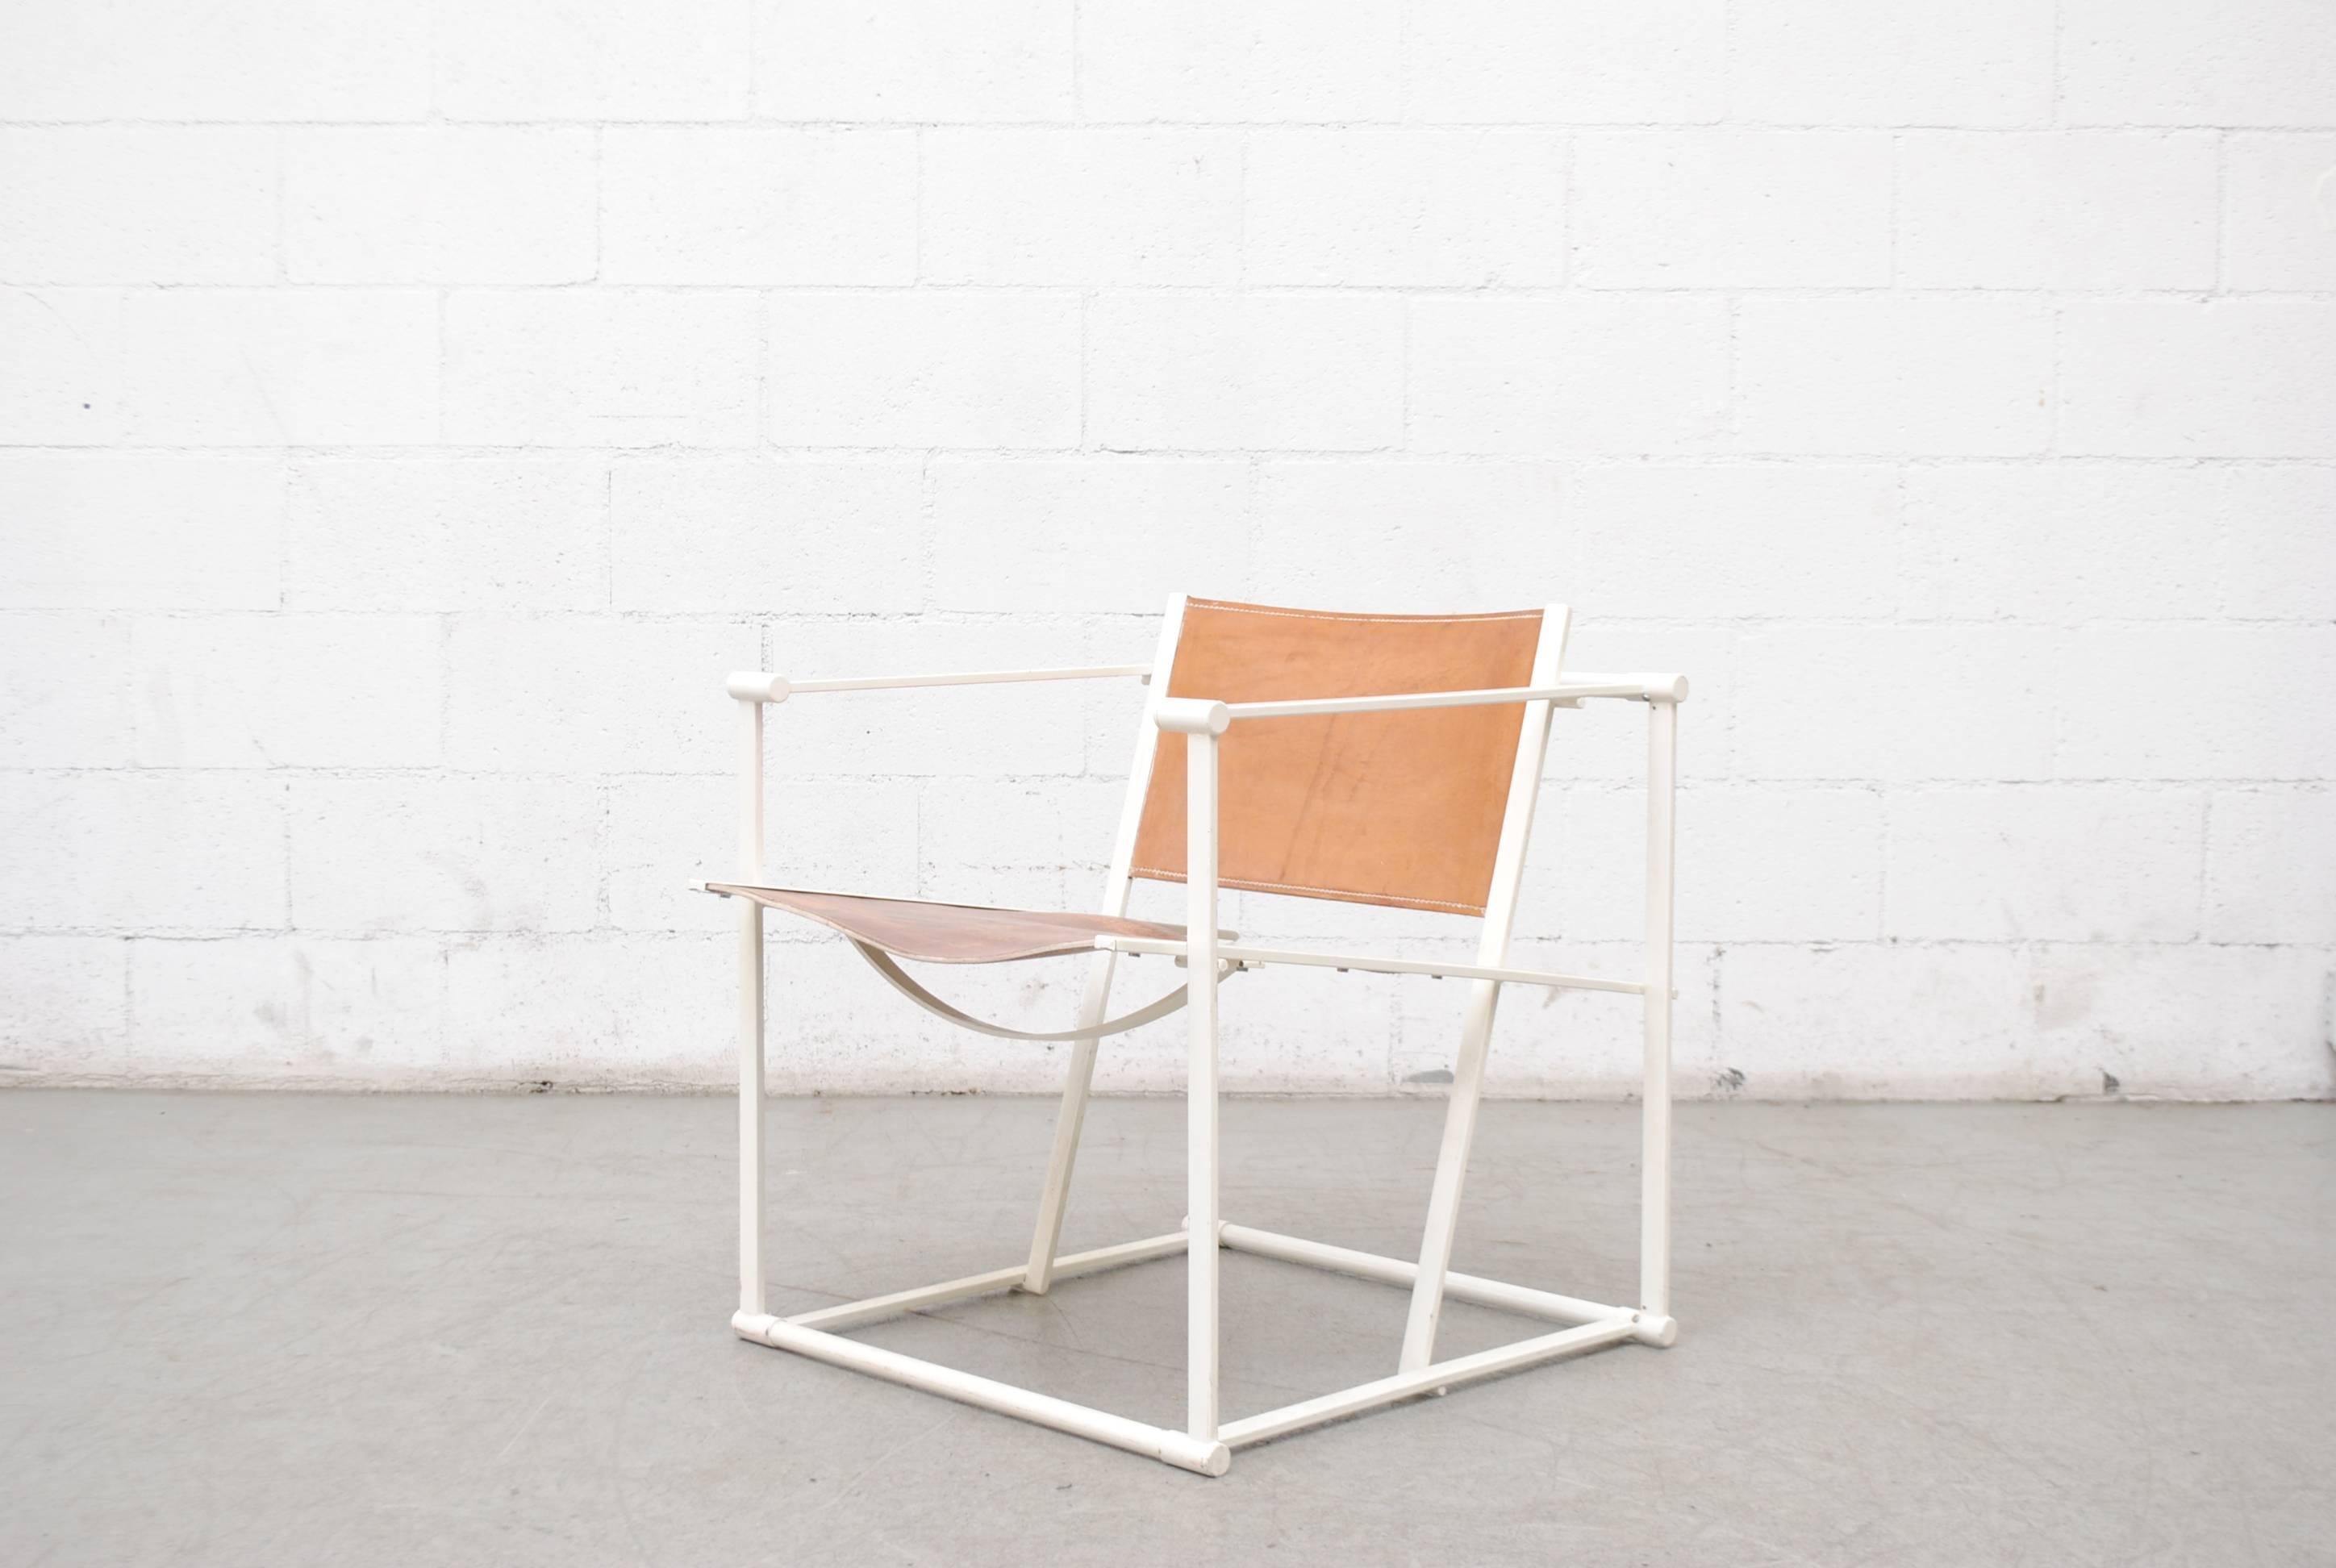 UMS Pastoe FM60, Cubic chair lounge chair, designed in 1980 by Radboud Van Beekum. White Enameled steel frame with natural leather seating. Frame is in original condition with some wear to enamel. Beautiful patina.